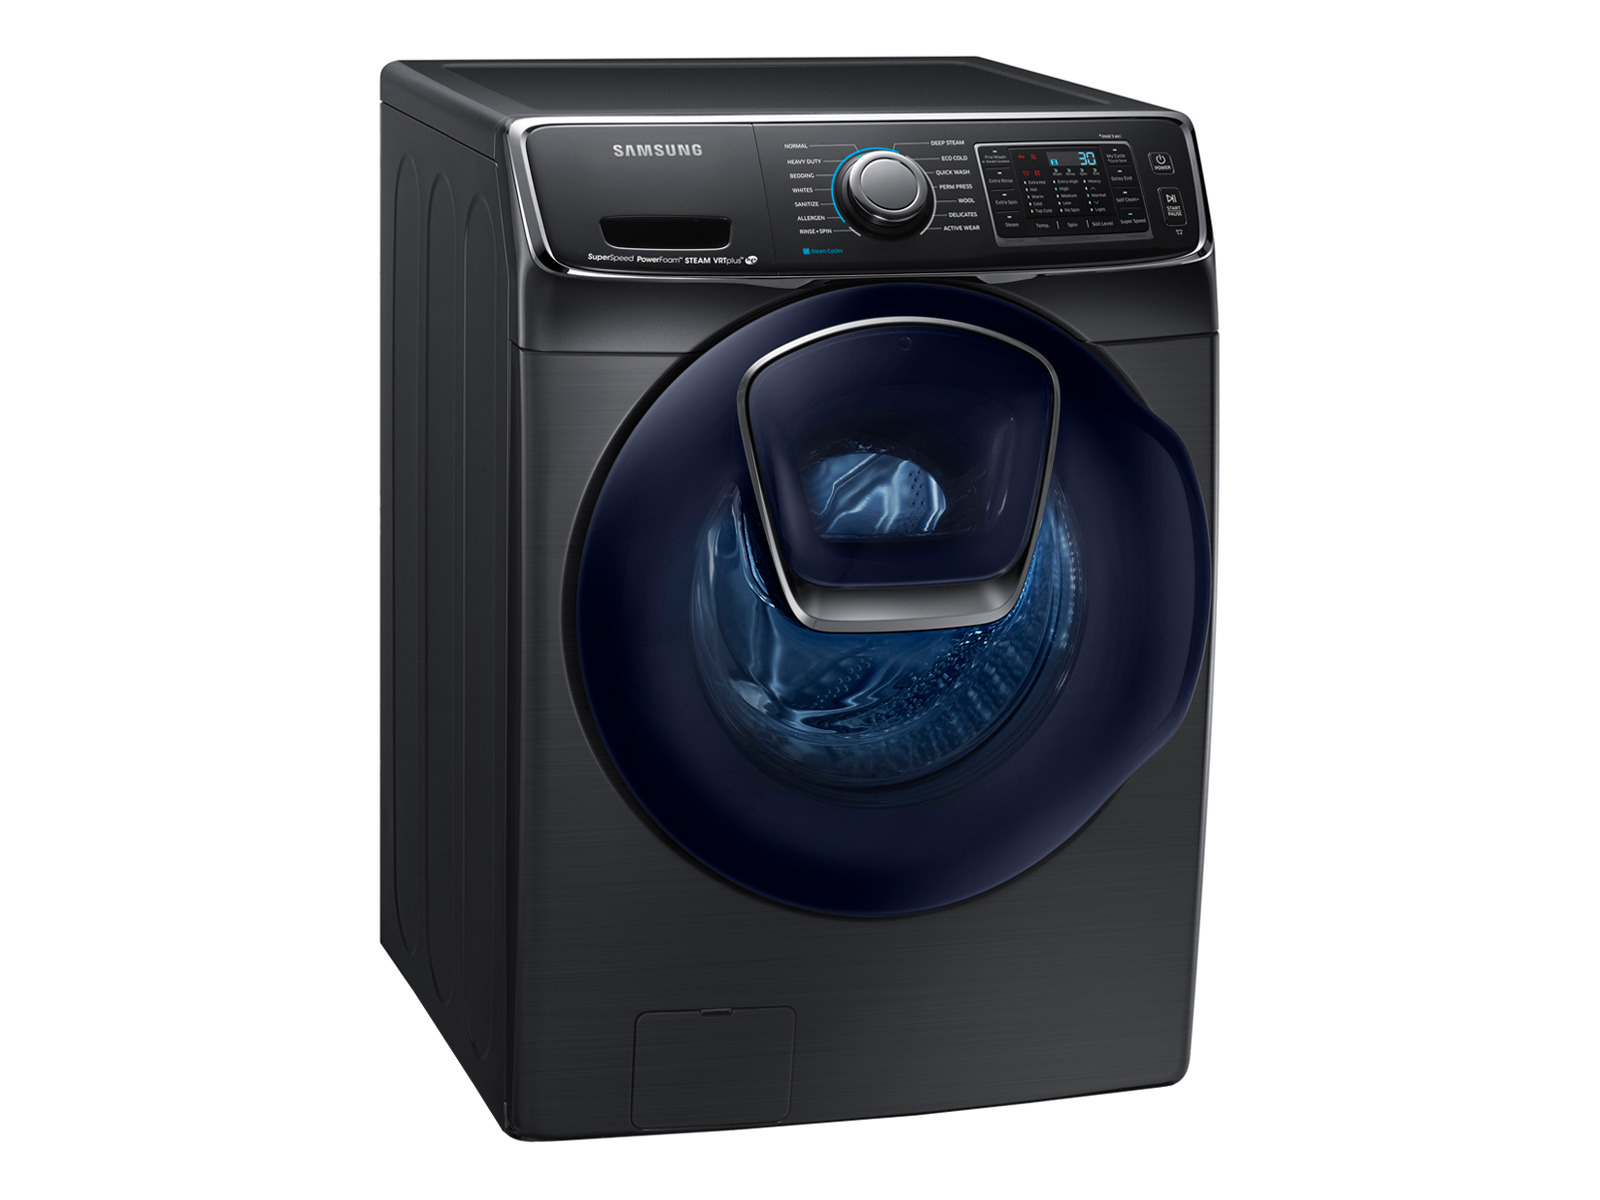 14 Things You Didn't Know You Could Clean in Your Washing Machine